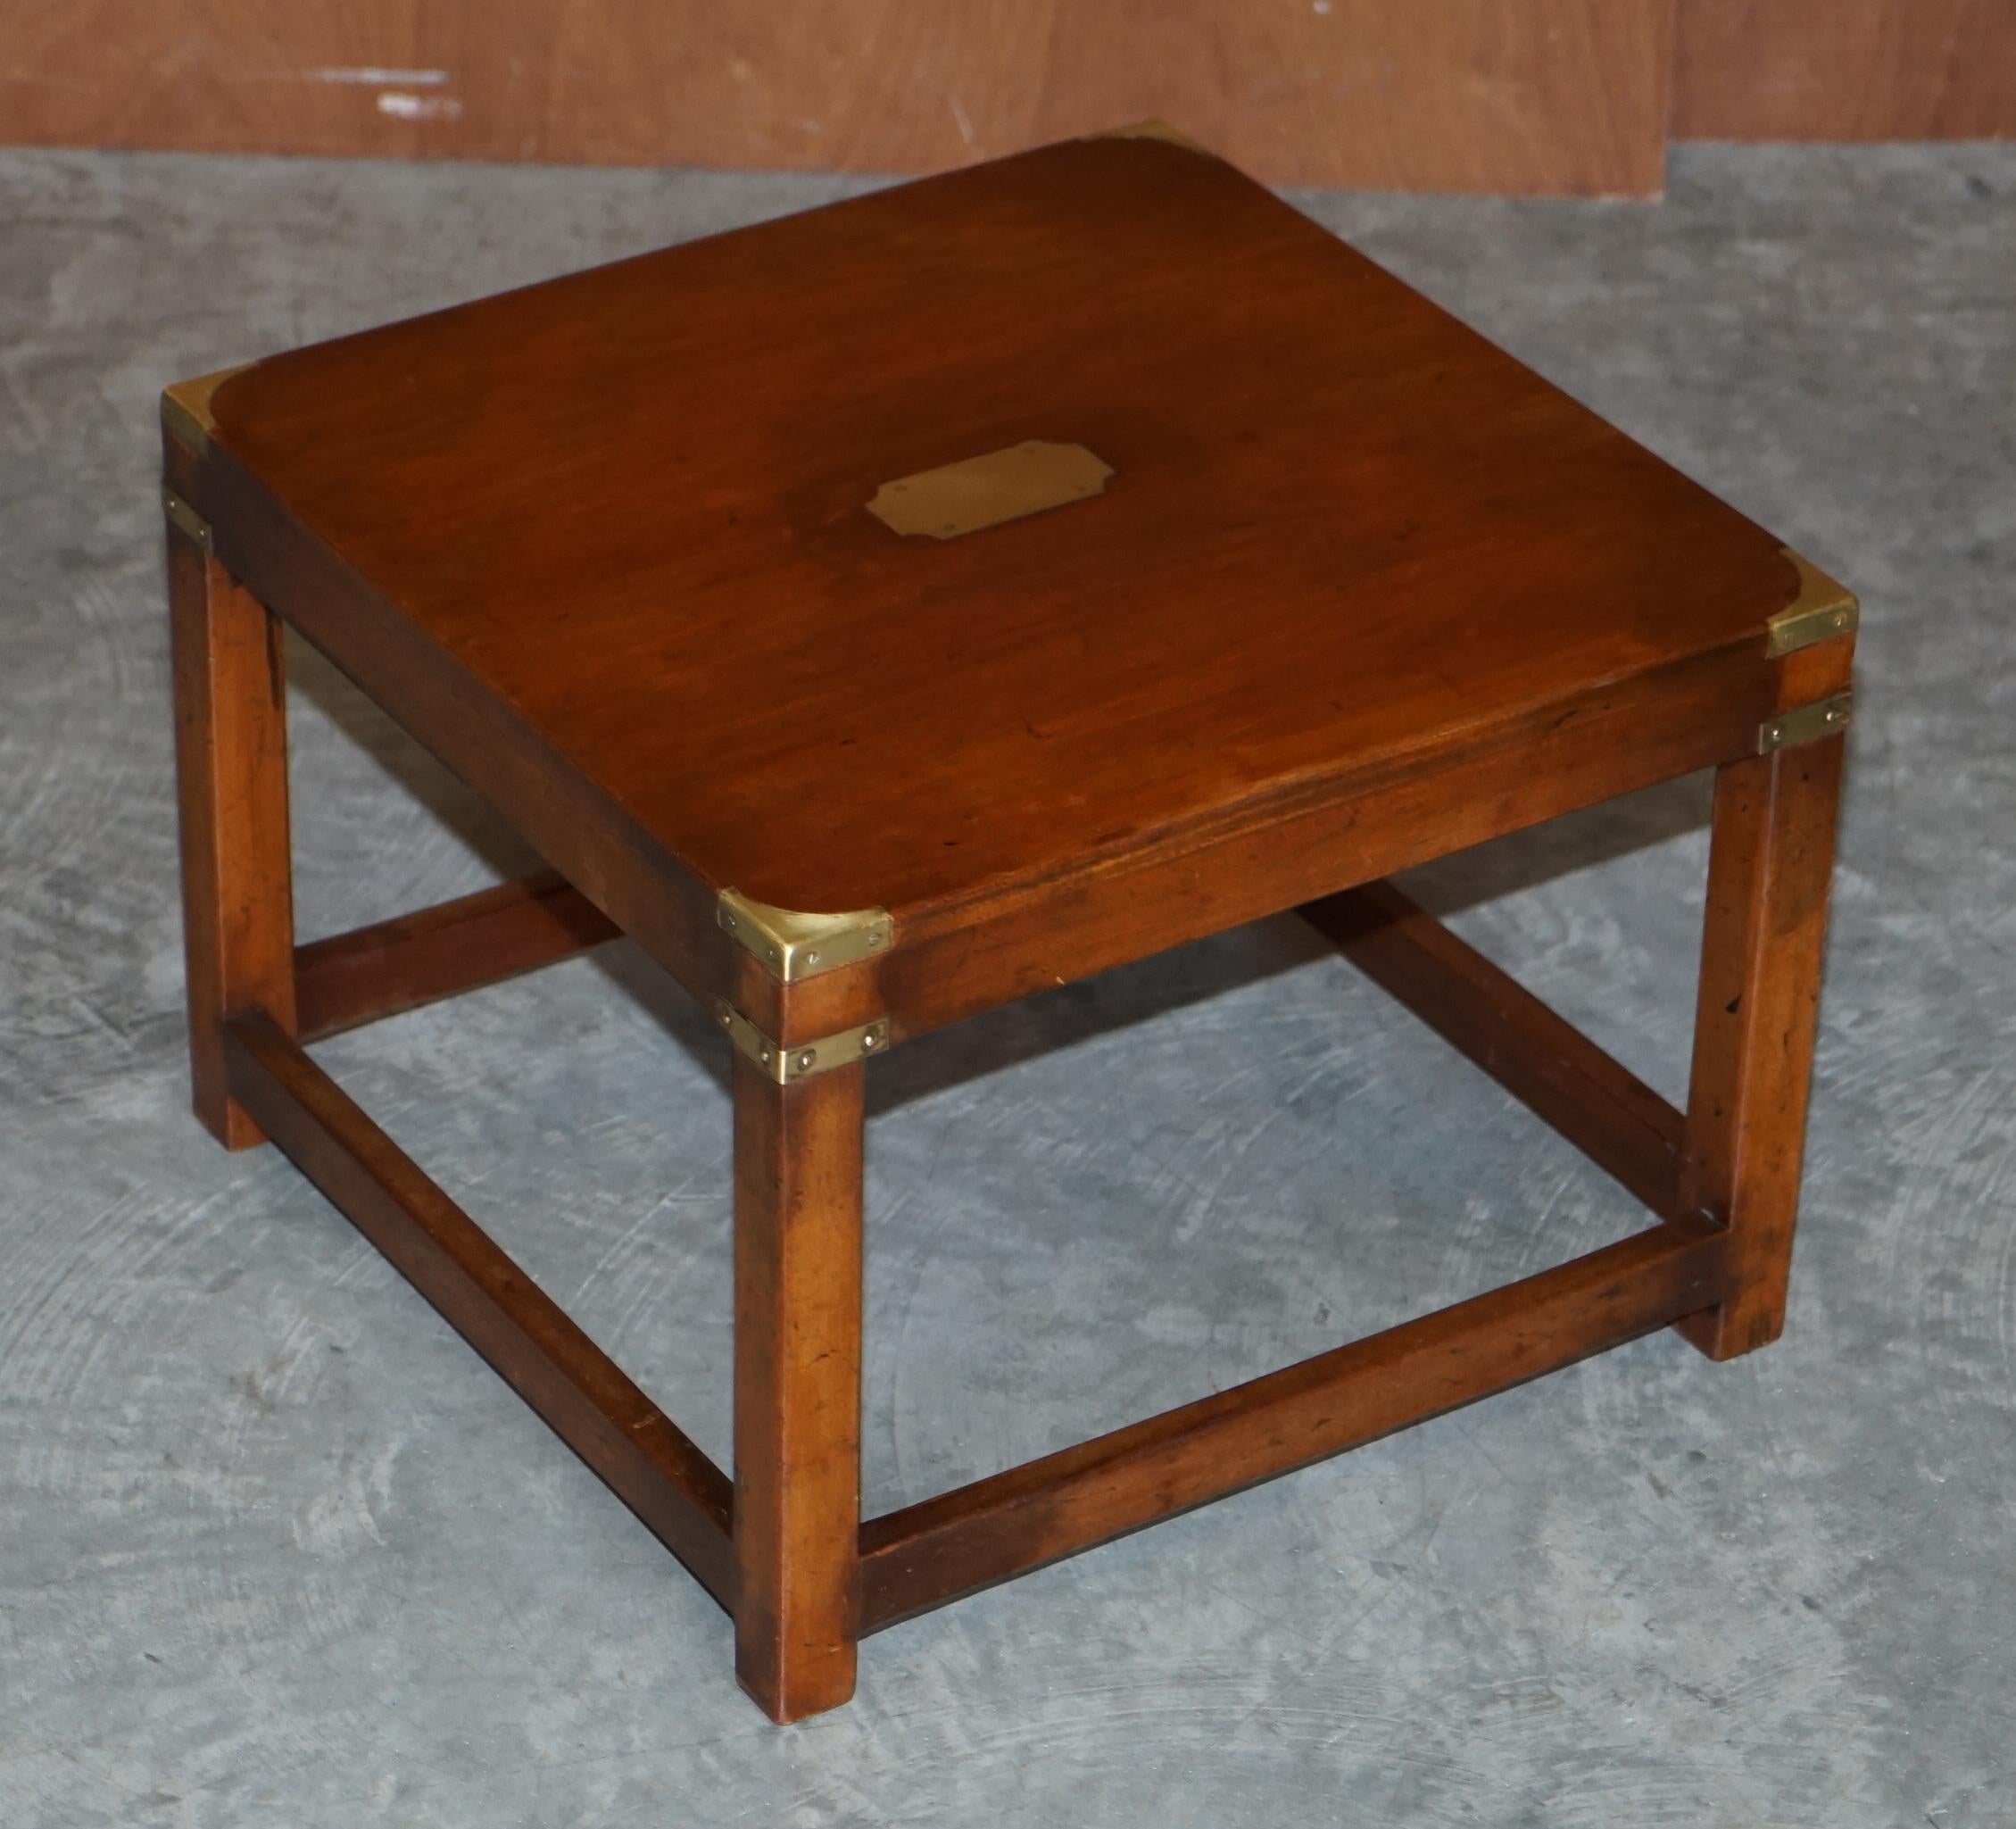 We are delighted to offer this stunning pair of fully restored Kennedy furniture Harrods London Military Campaign side tables.

A good looking and well-made pair, these are absolutely iconic and highly collectable.

This pair have been fully